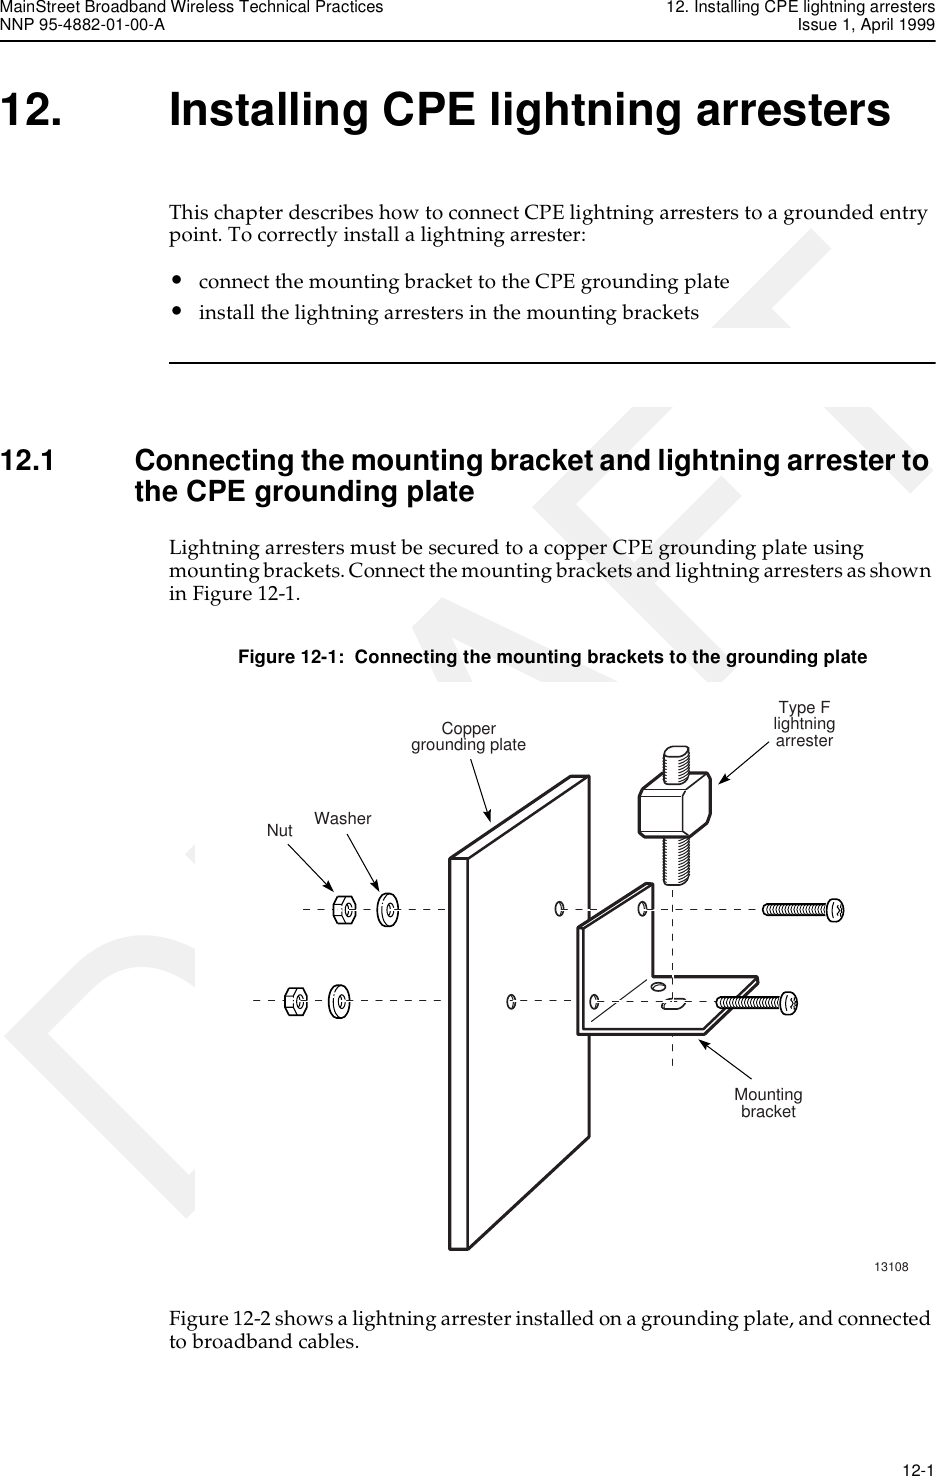 MainStreet Broadband Wireless Technical Practices 12. Installing CPE lightning arrestersNNP 95-4882-01-00-A Issue 1, April 1999   12-1DRAFT12. Installing CPE lightning arrestersThis chapter describes how to connect CPE lightning arresters to a grounded entry point. To correctly install a lightning arrester:•connect the mounting bracket to the CPE grounding plate•install the lightning arresters in the mounting brackets12.1 Connecting the mounting bracket and lightning arrester to the CPE grounding plateLightning arresters must be secured to a copper CPE grounding plate using mounting brackets. Connect the mounting brackets and lightning arresters as shown in Figure 12-1.Figure 12-1:  Connecting the mounting brackets to the grounding plateFigure 12-2 shows a lightning arrester installed on a grounding plate, and connected to broadband cables.13108WasherType FlightningarresterMountingbracketCoppergrounding plateNut